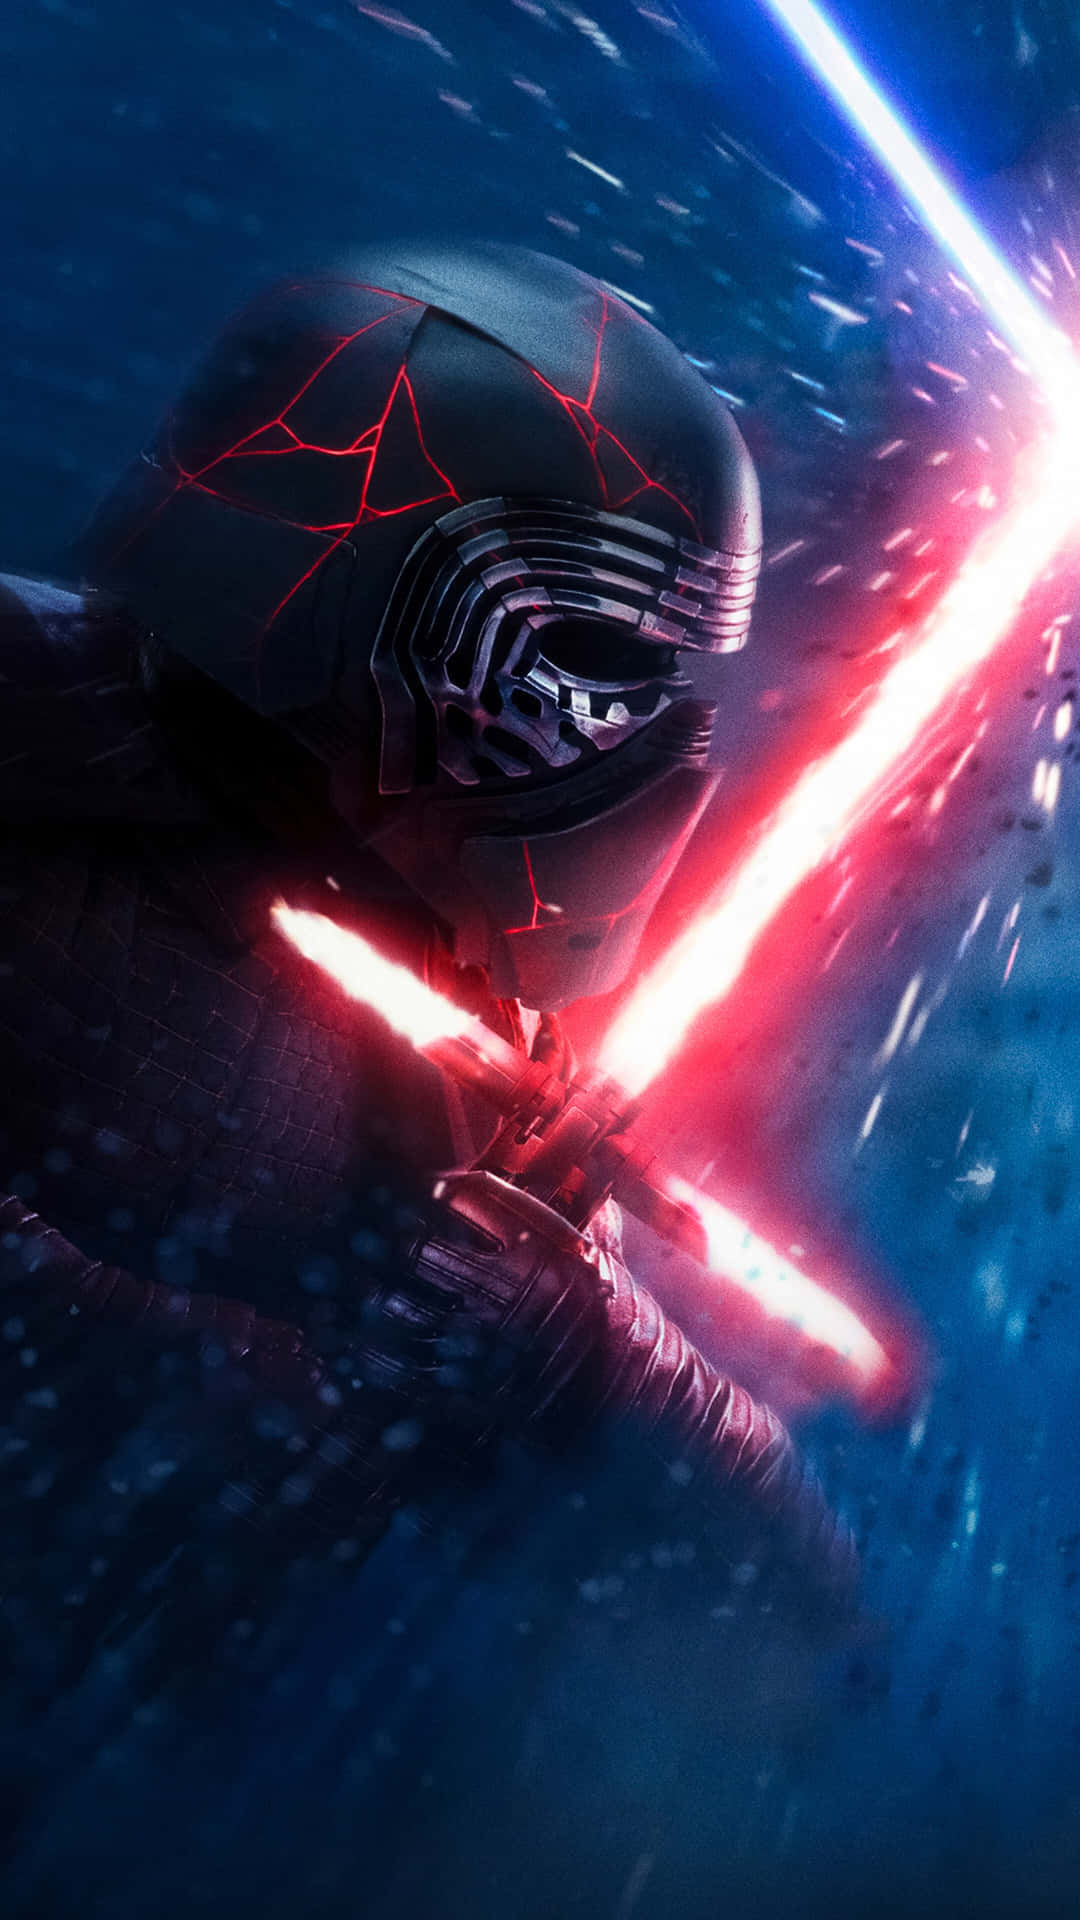 "Kylo Ren, Standing Tall Amidst the Dark and Magical Force" Wallpaper